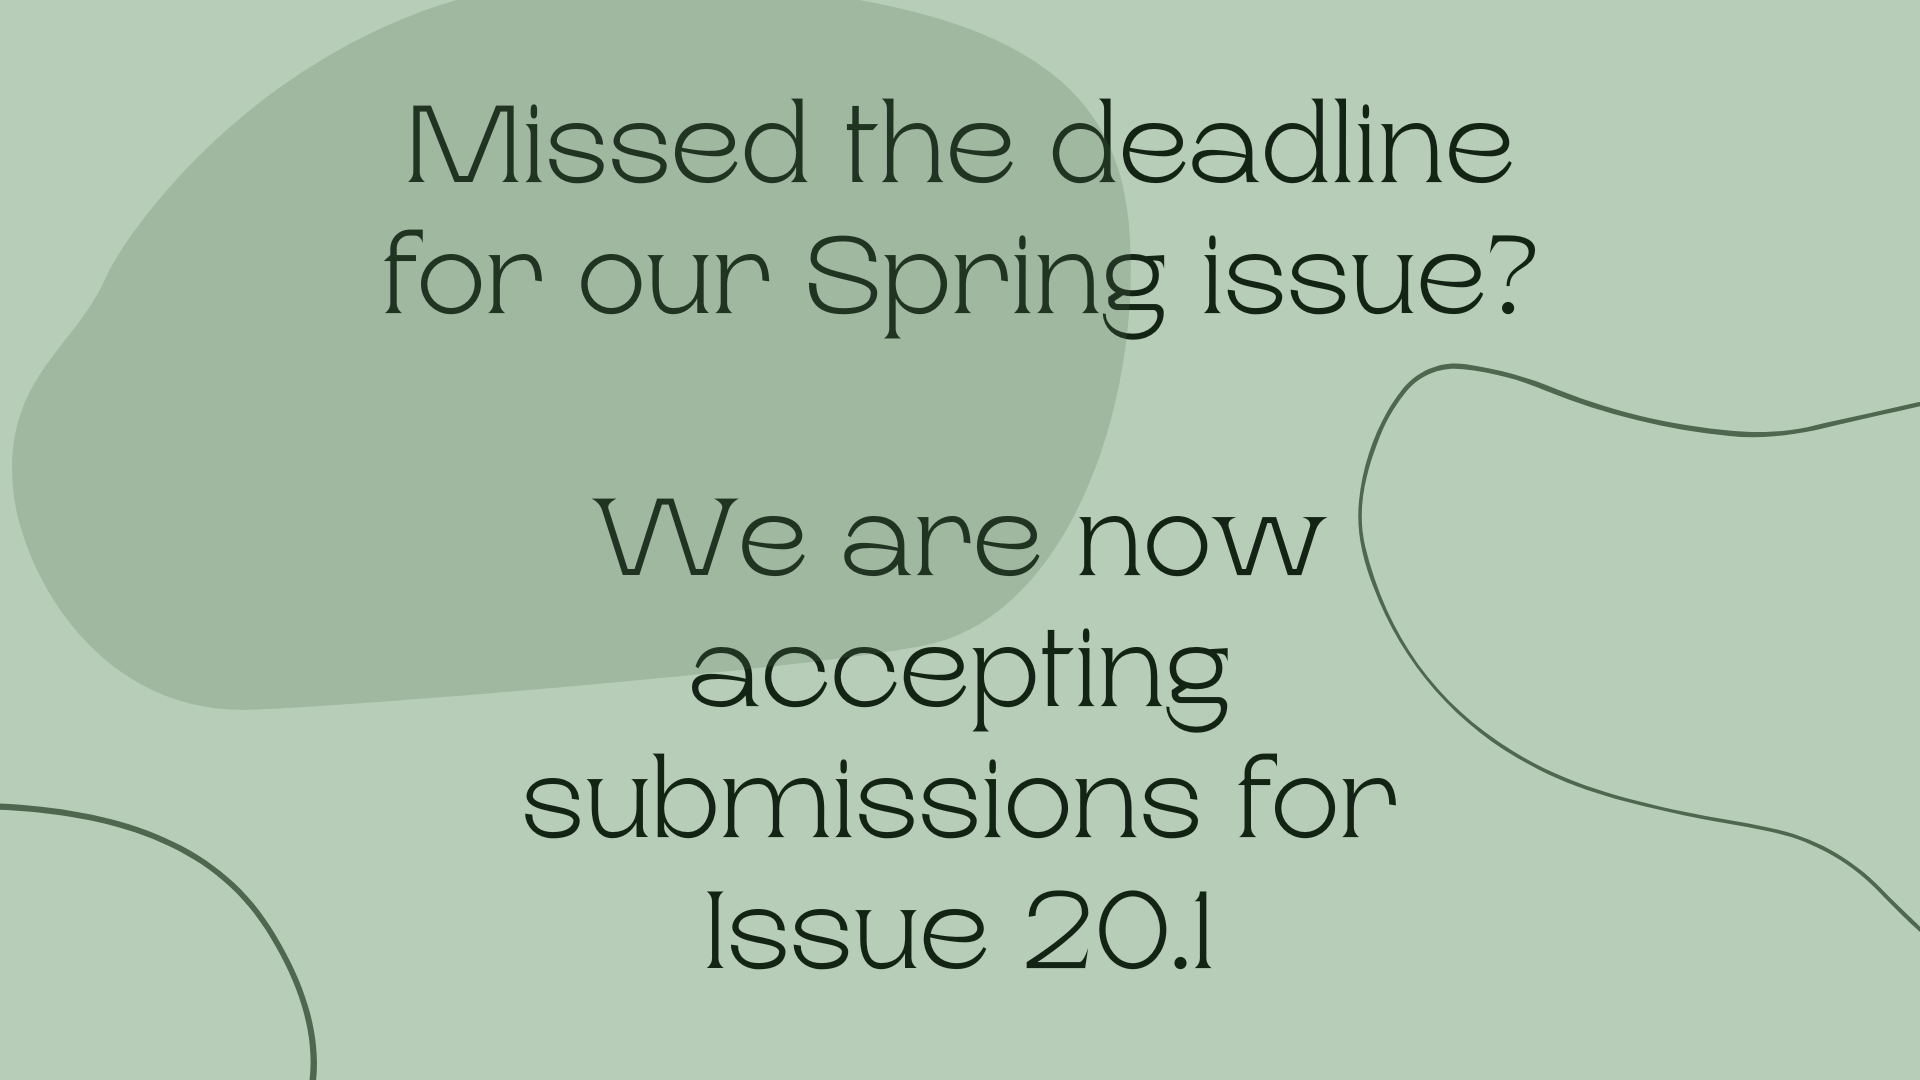 Missed the deadline for our Spring issue? We are now accepting submissions for Issue 20.1